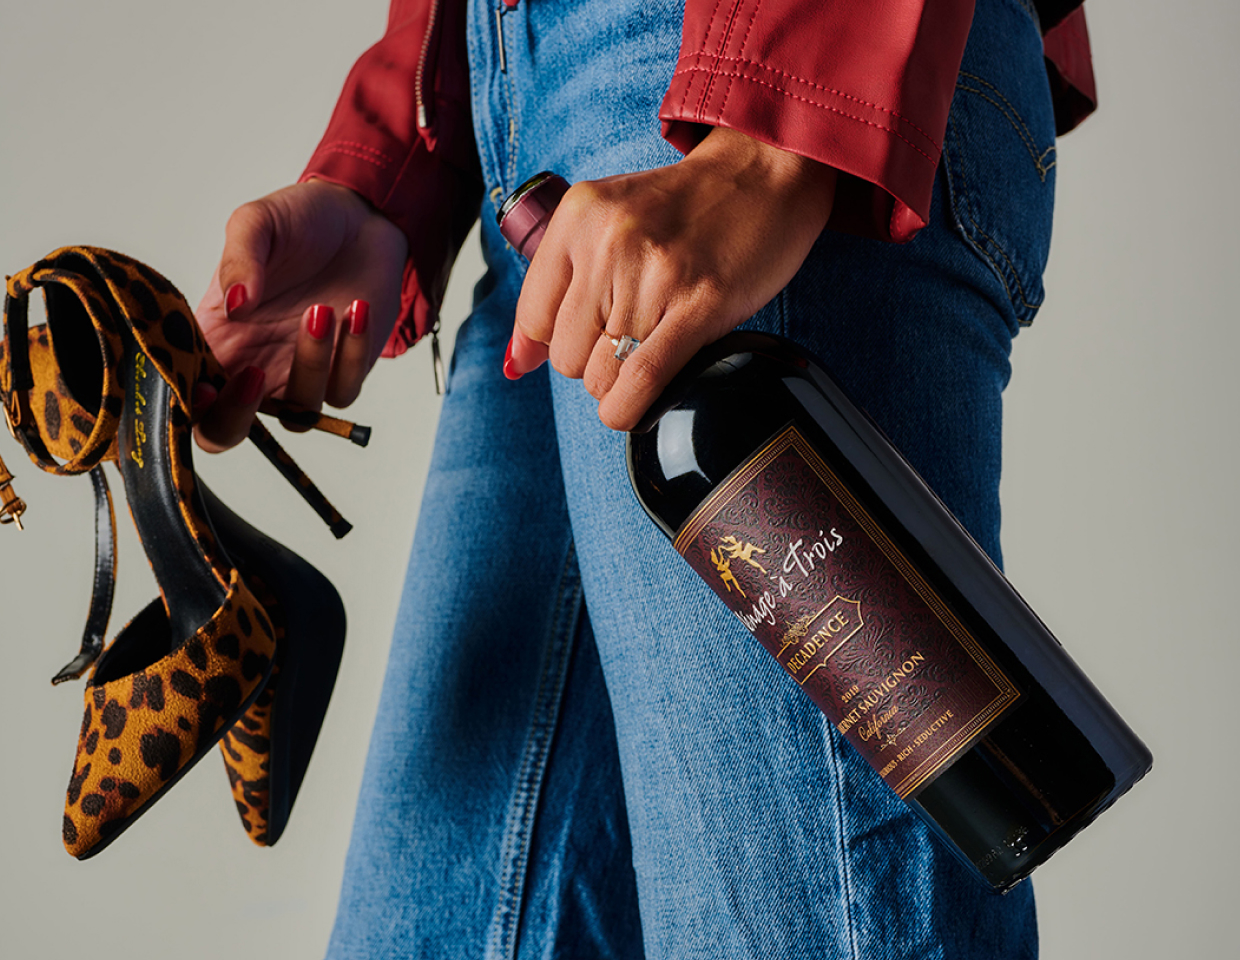 Woman in jeans and red jacket holding leopard print high heels and a bottle of Menage a Trois Decadence.